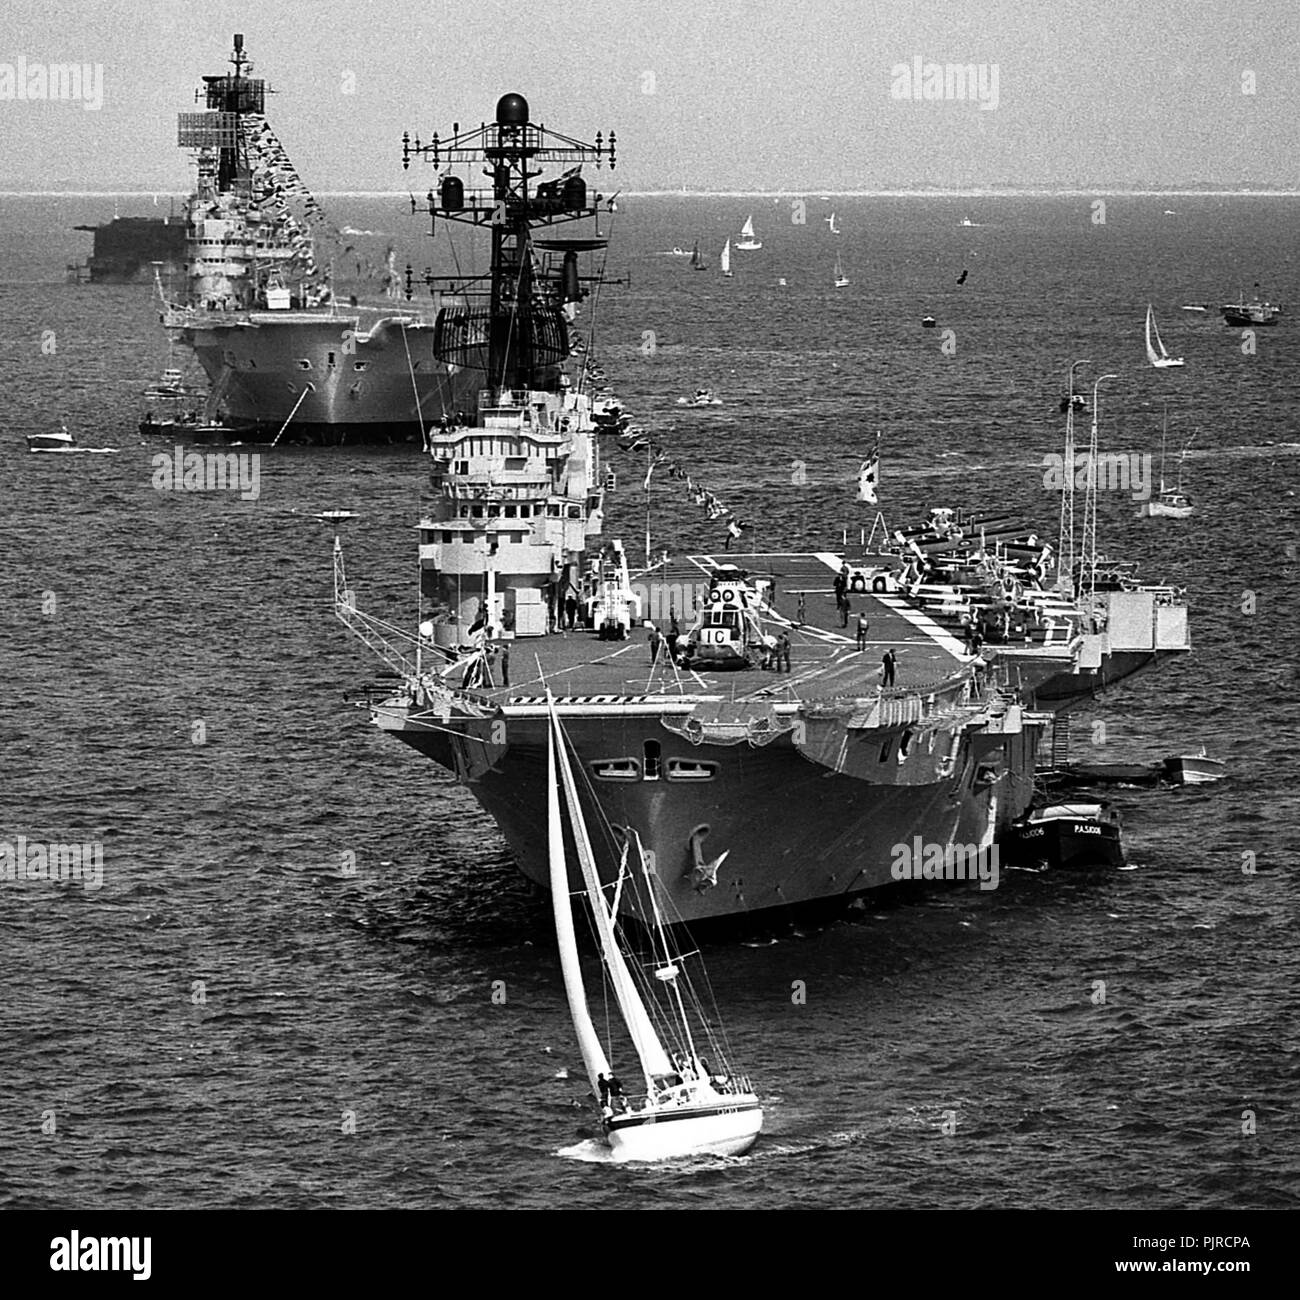 AJAXNETPHOTO. 28TH JUNE, 1977. PORTSMOUTH, ENLAND. - LINE ASTERN -  THE AIRCRAFT CARRIERS HMAS MELBOURNE AND HMS ARK ROYAL AT THE SILVER JUBILEE FLEET REVIEW.  PHOTO:JONATHAN EASTLAND/AJAX.  REF:HDD ()NA MELBOURNE 1977 11. Stock Photo